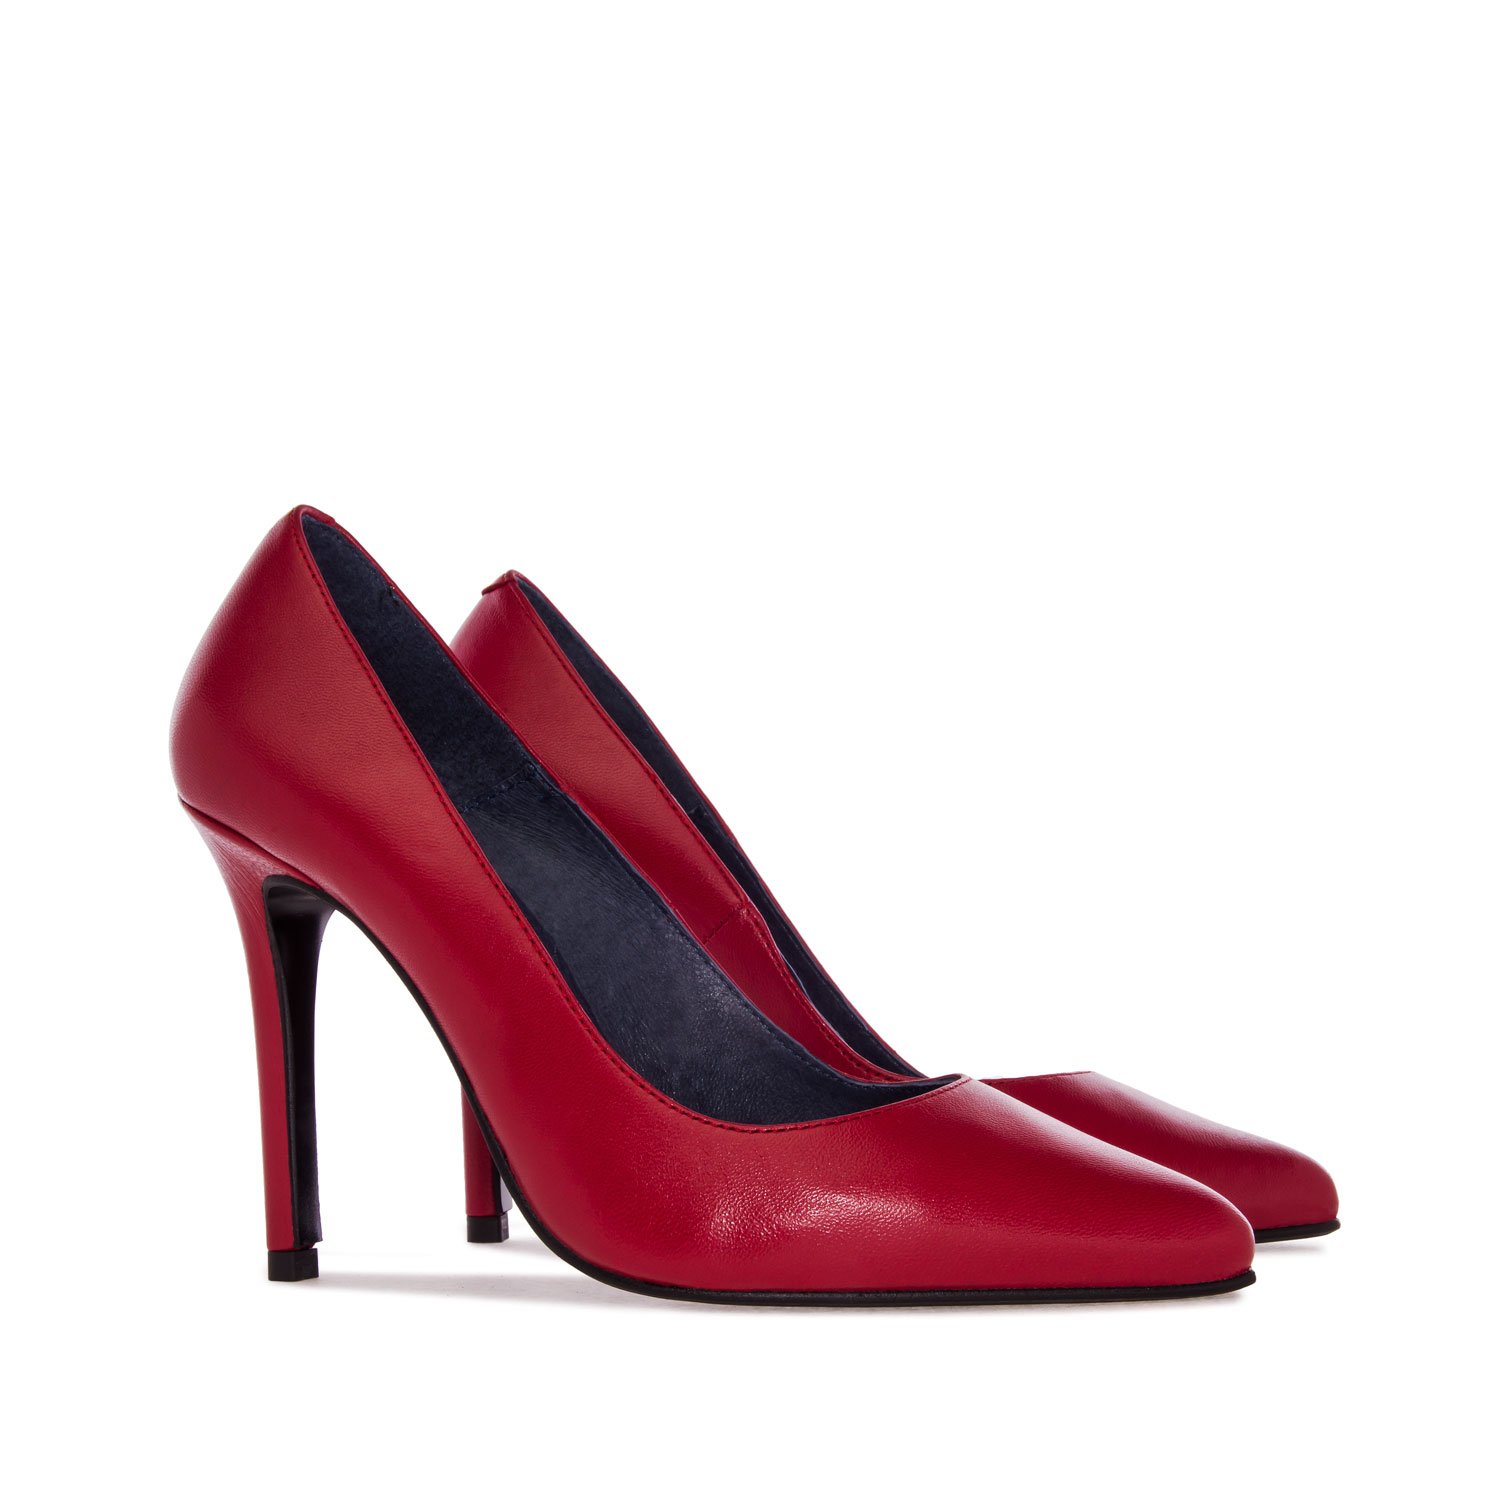 Heeled Shoes in Red Nappa Leather 